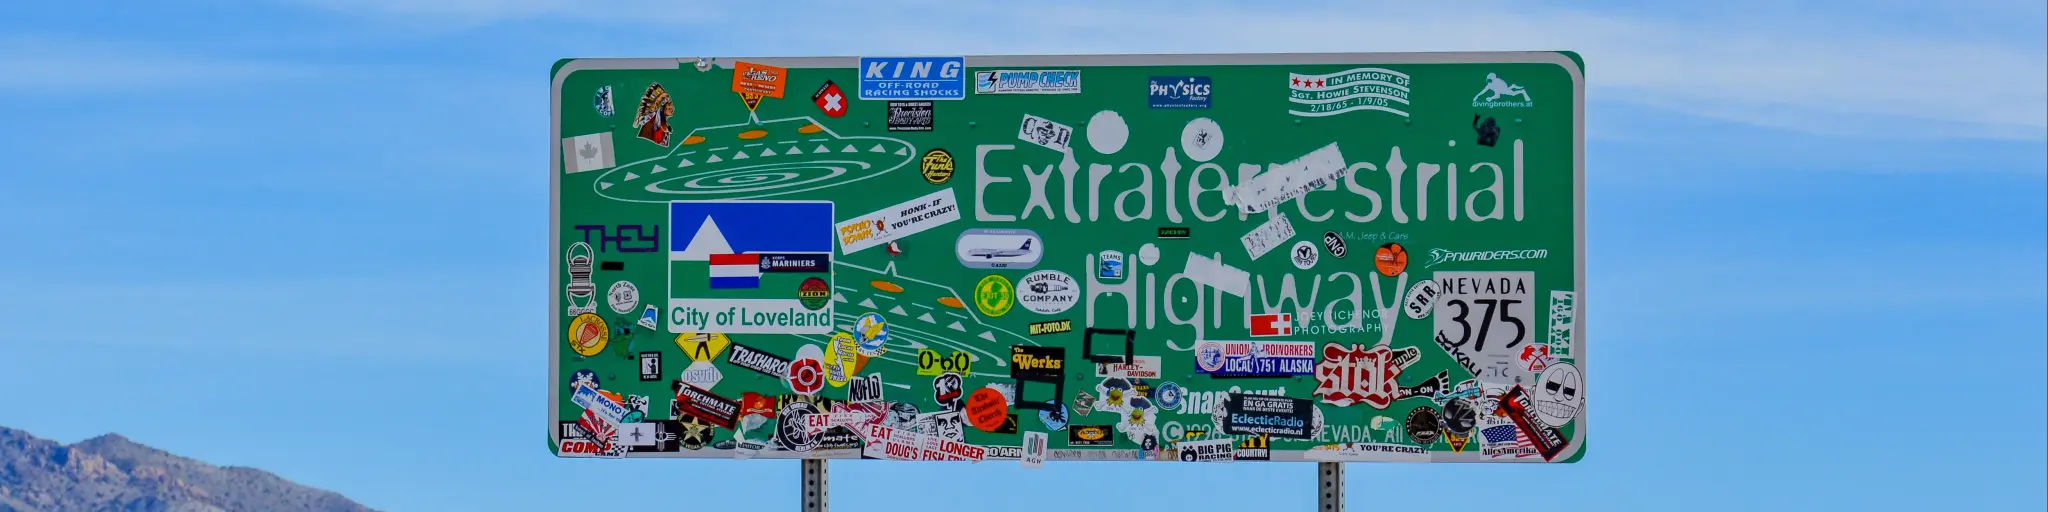 View of the famous Extraterrestrial Highway road sign in Nevada, USA